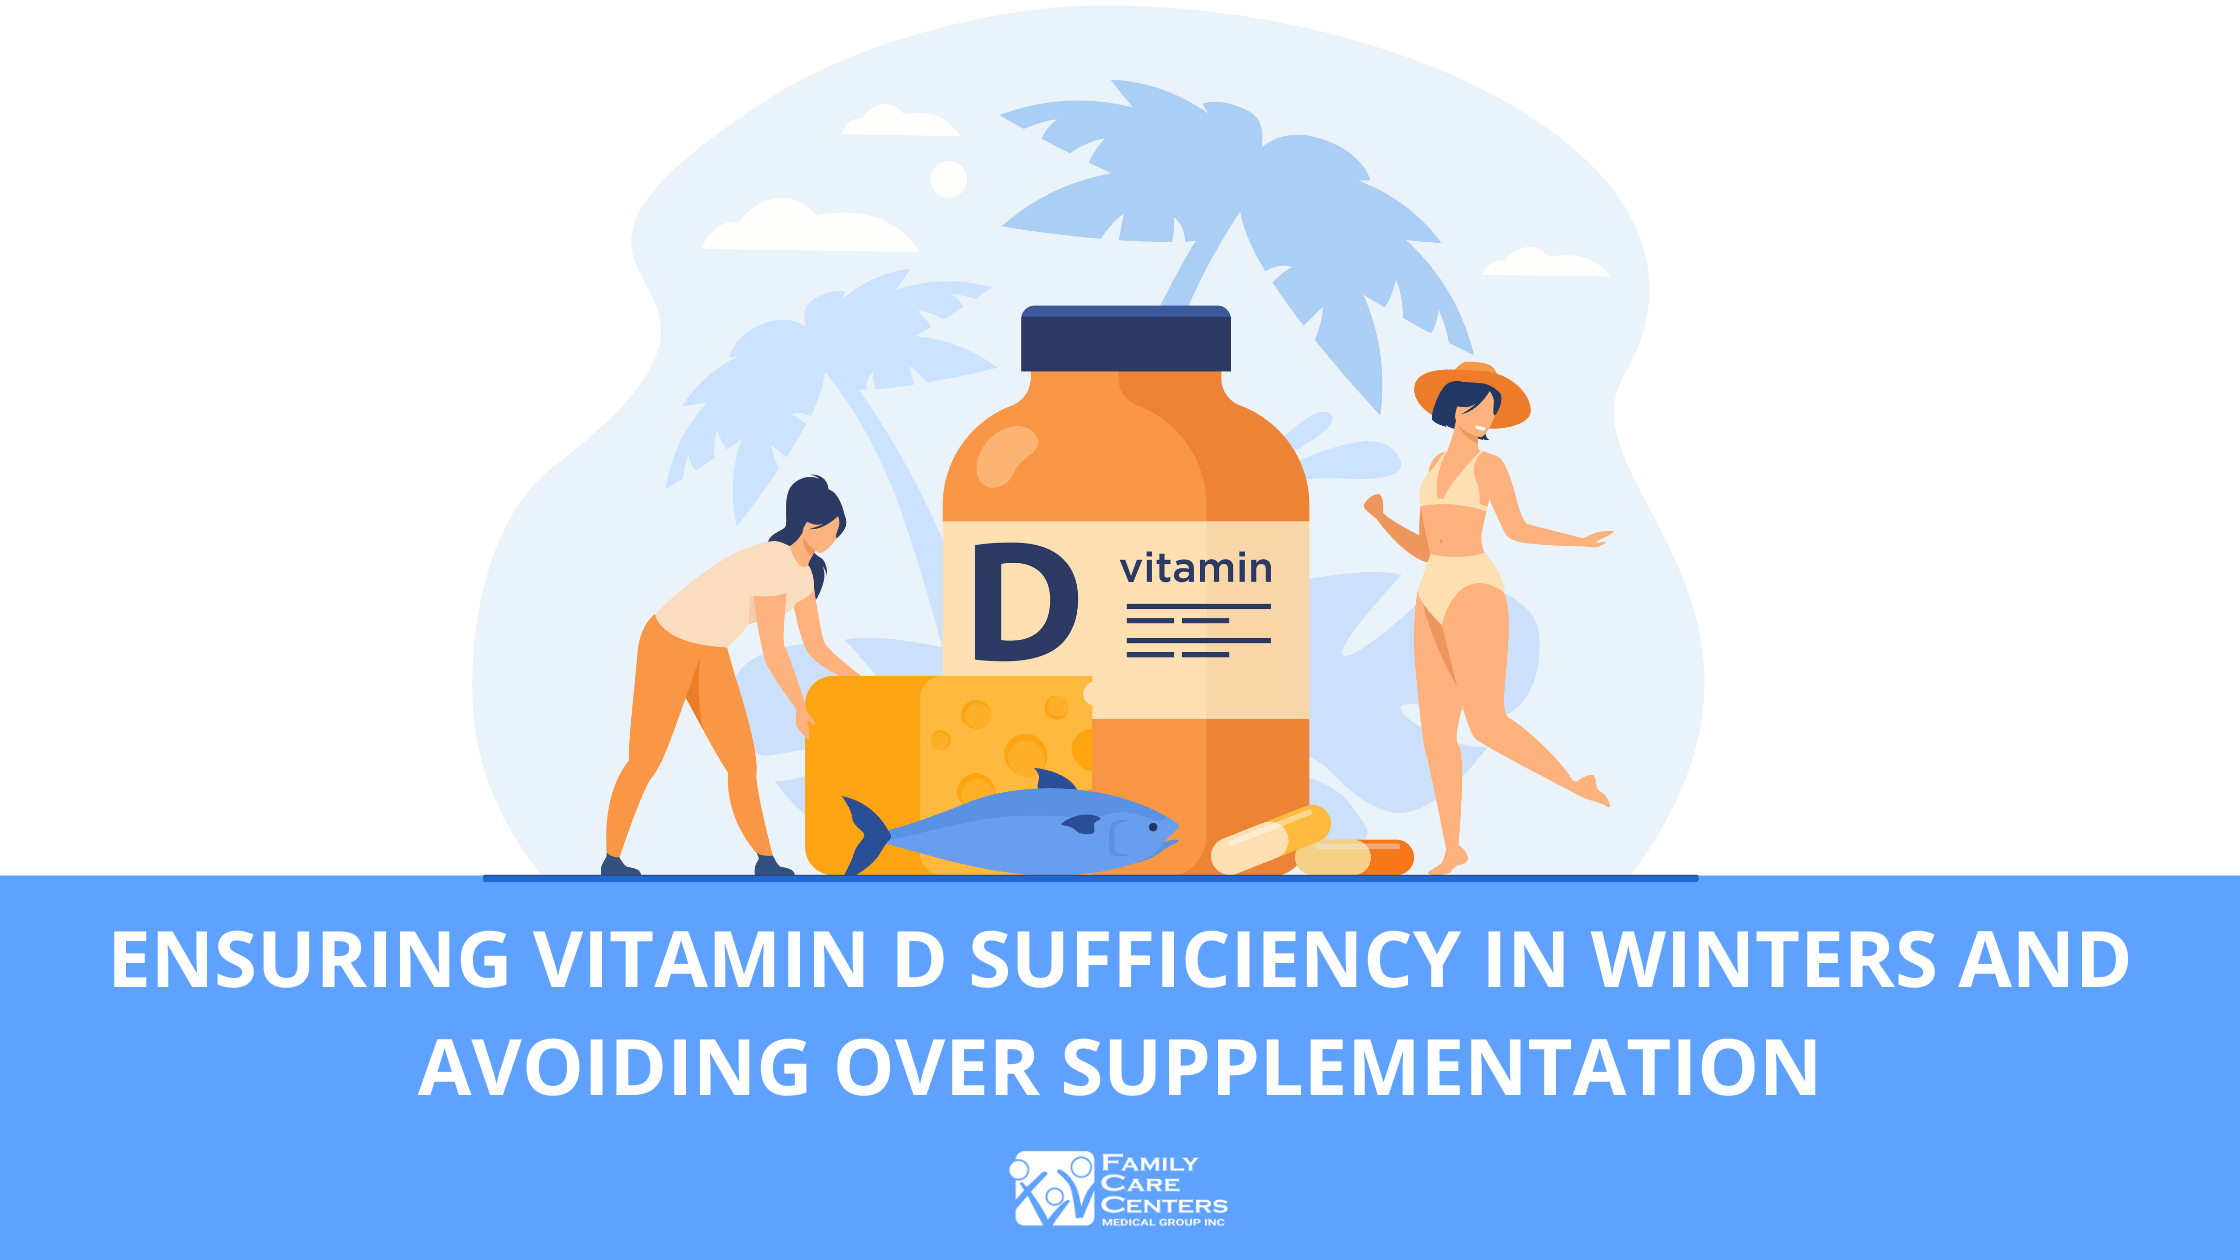 Ensuring Vitamin D Sufficiency in Winters and Avoiding Over Supplementation